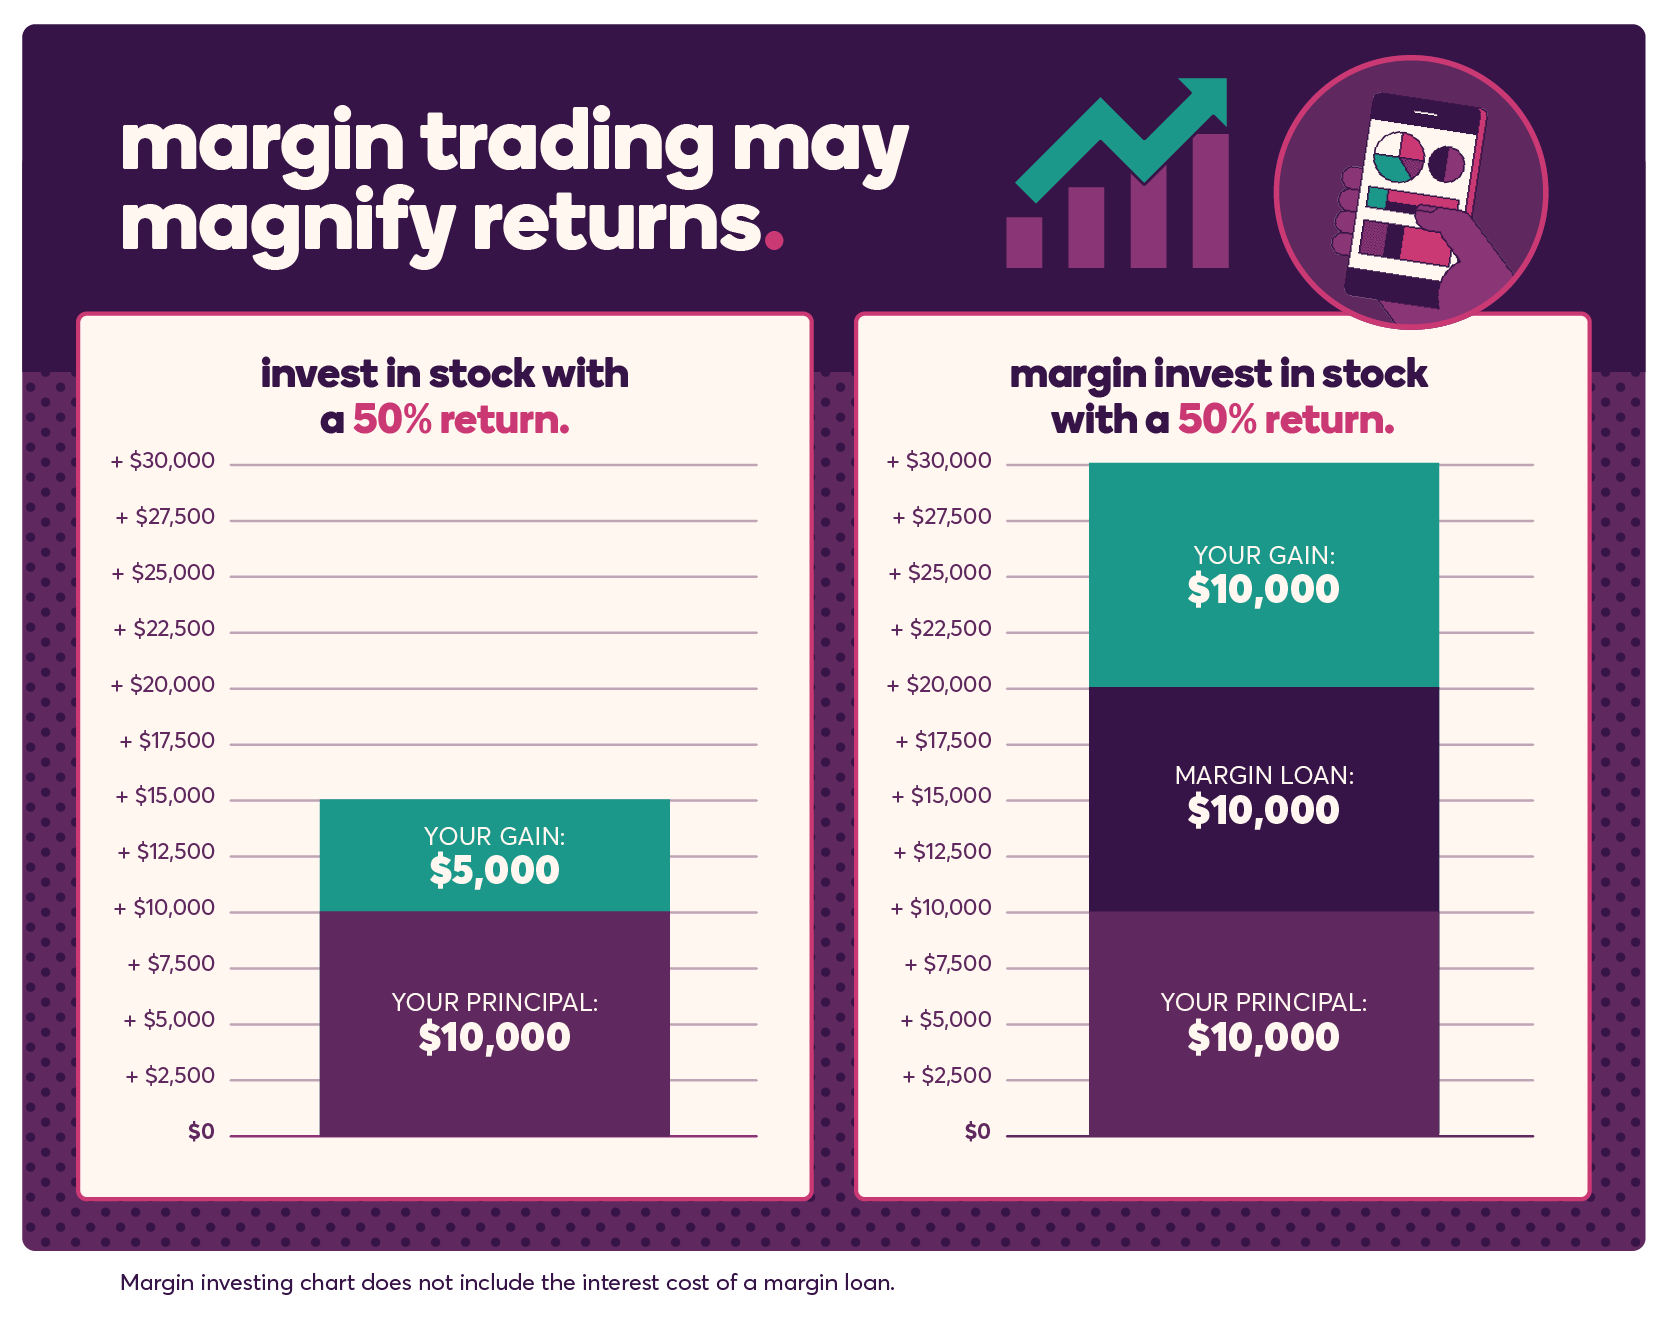 Margin trading may magnify returns. If you invest in stock with a 50% return, a principal of $10,000 will see a gain of $5,000 for a total of $15,000. If you margin invest in stock with a 50% return, a principal of $10,000, plus a margin loan of $10,000 will see a gain of $10,000 for a total of $30,000. This example does not include the interest cost of a margin loan.